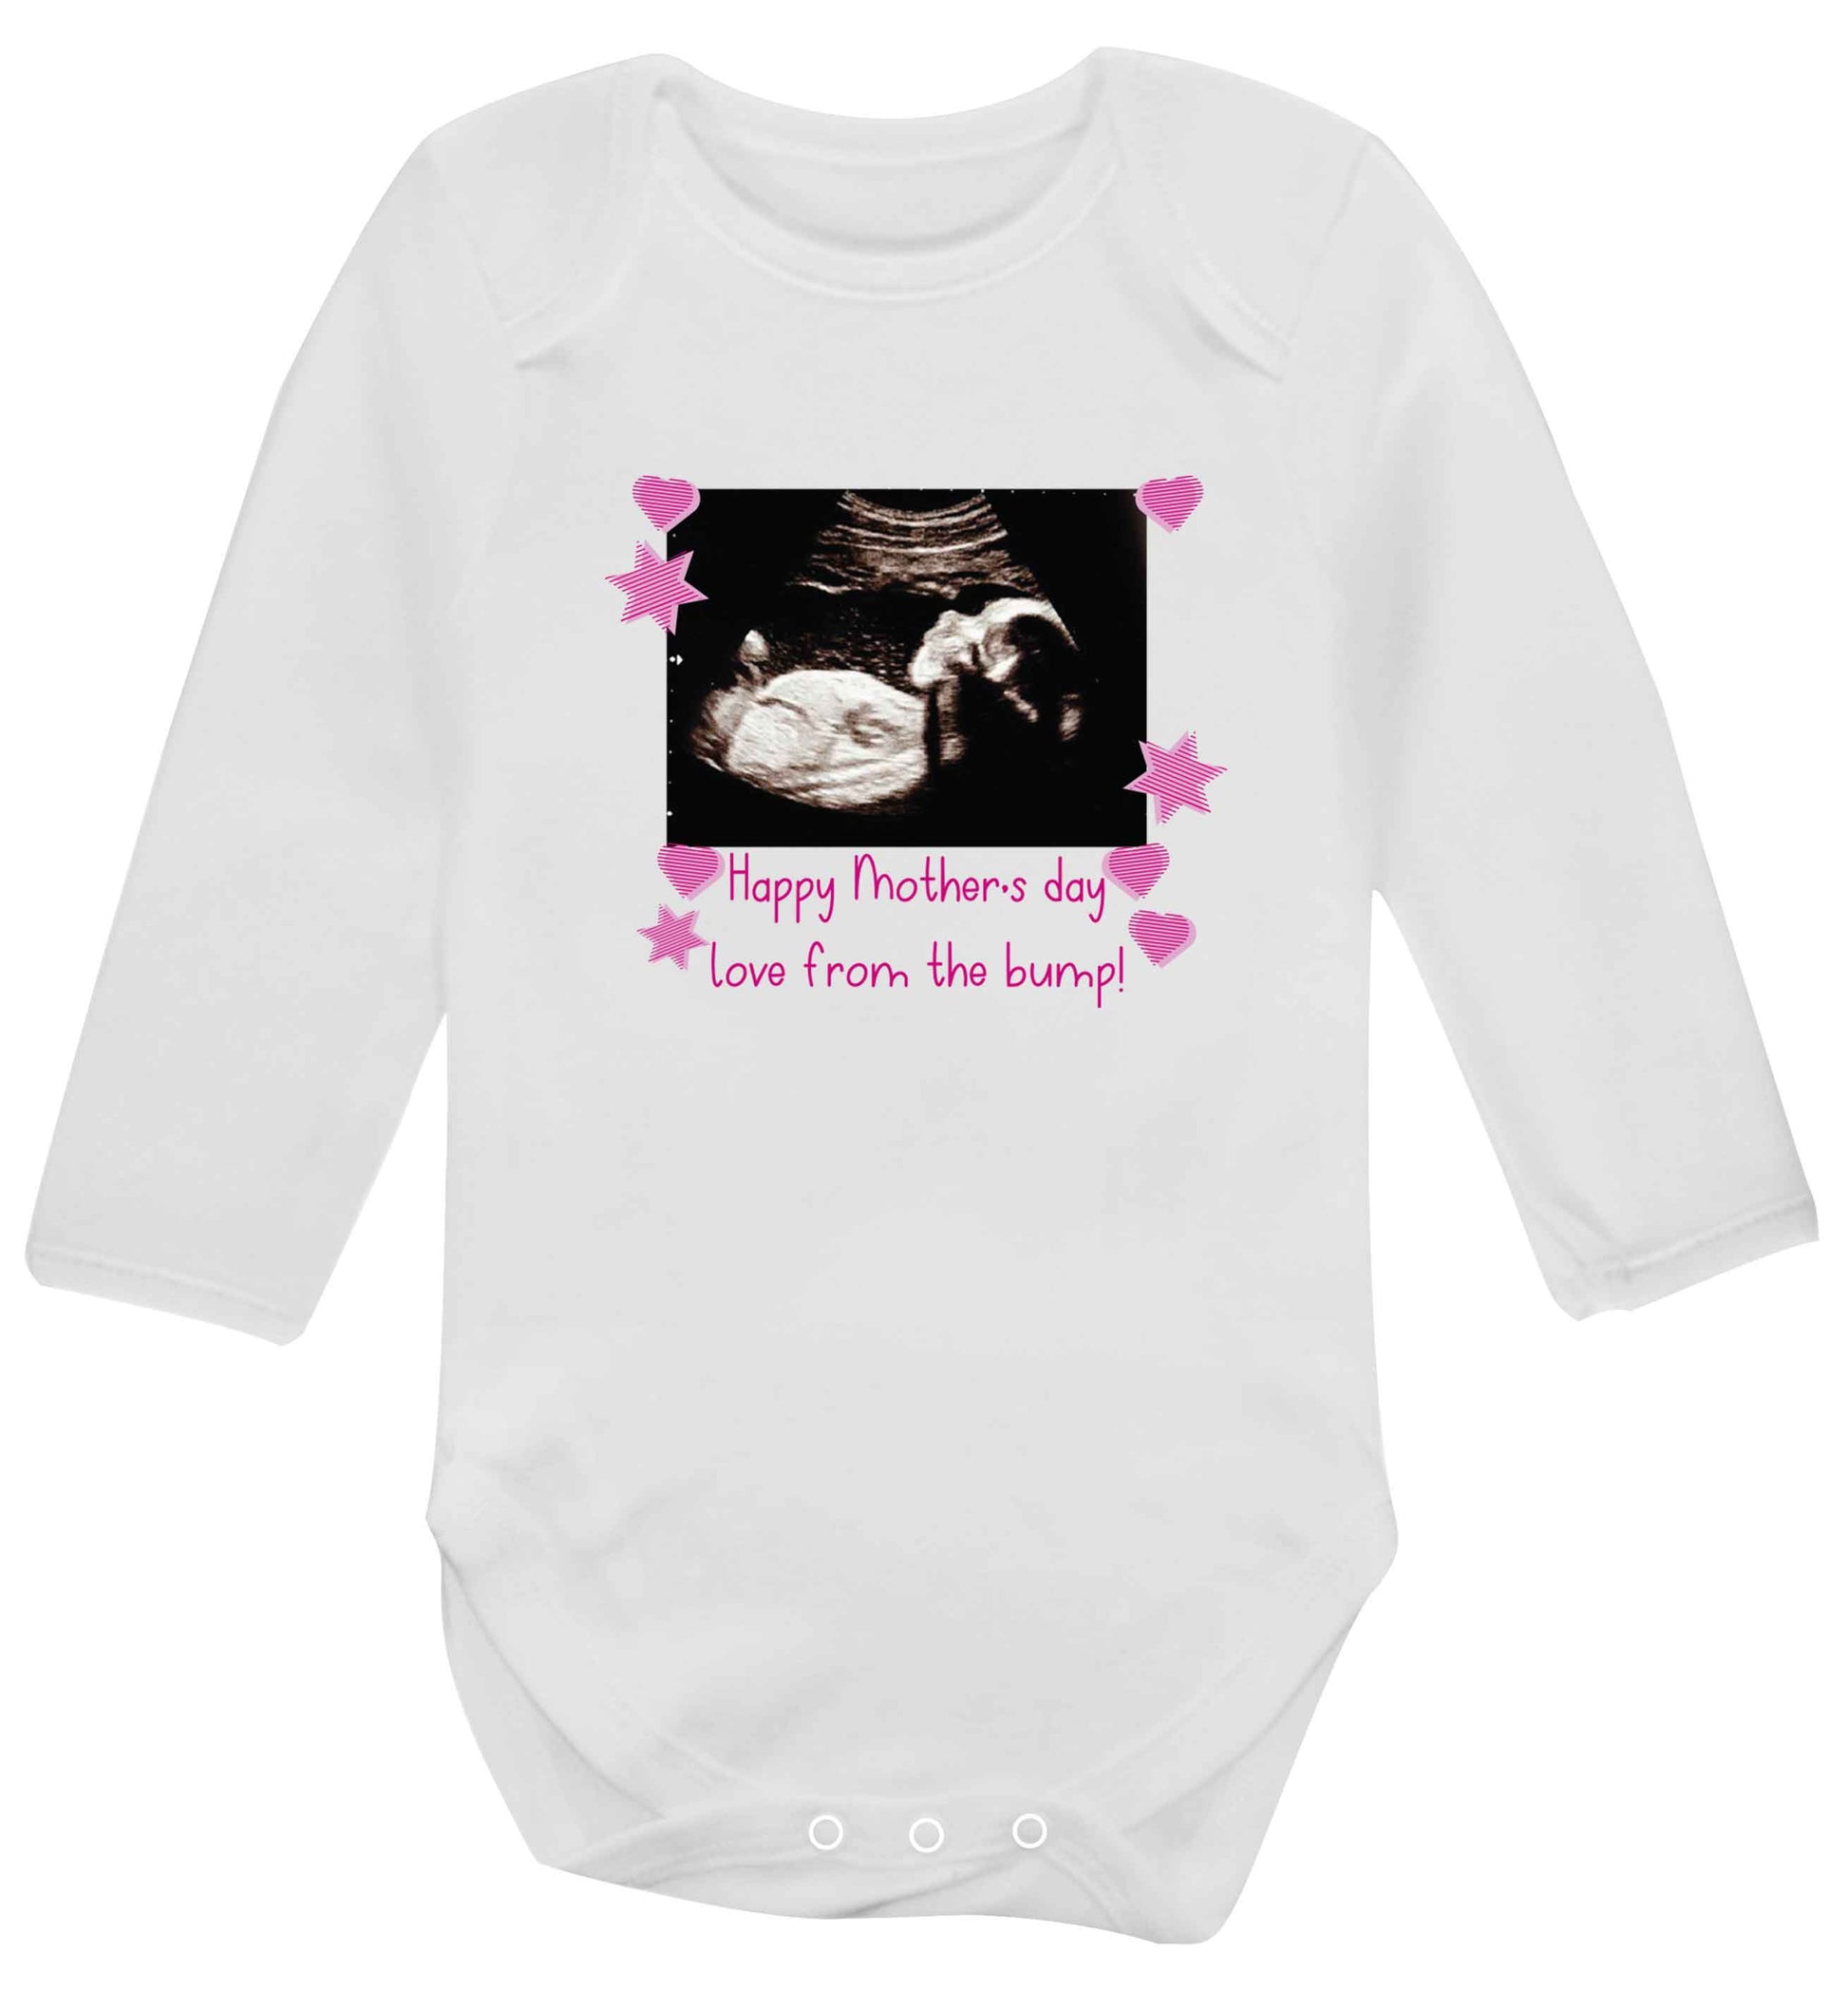 Happy Mother's day love from the bump - pink  baby vest long sleeved white 6-12 months